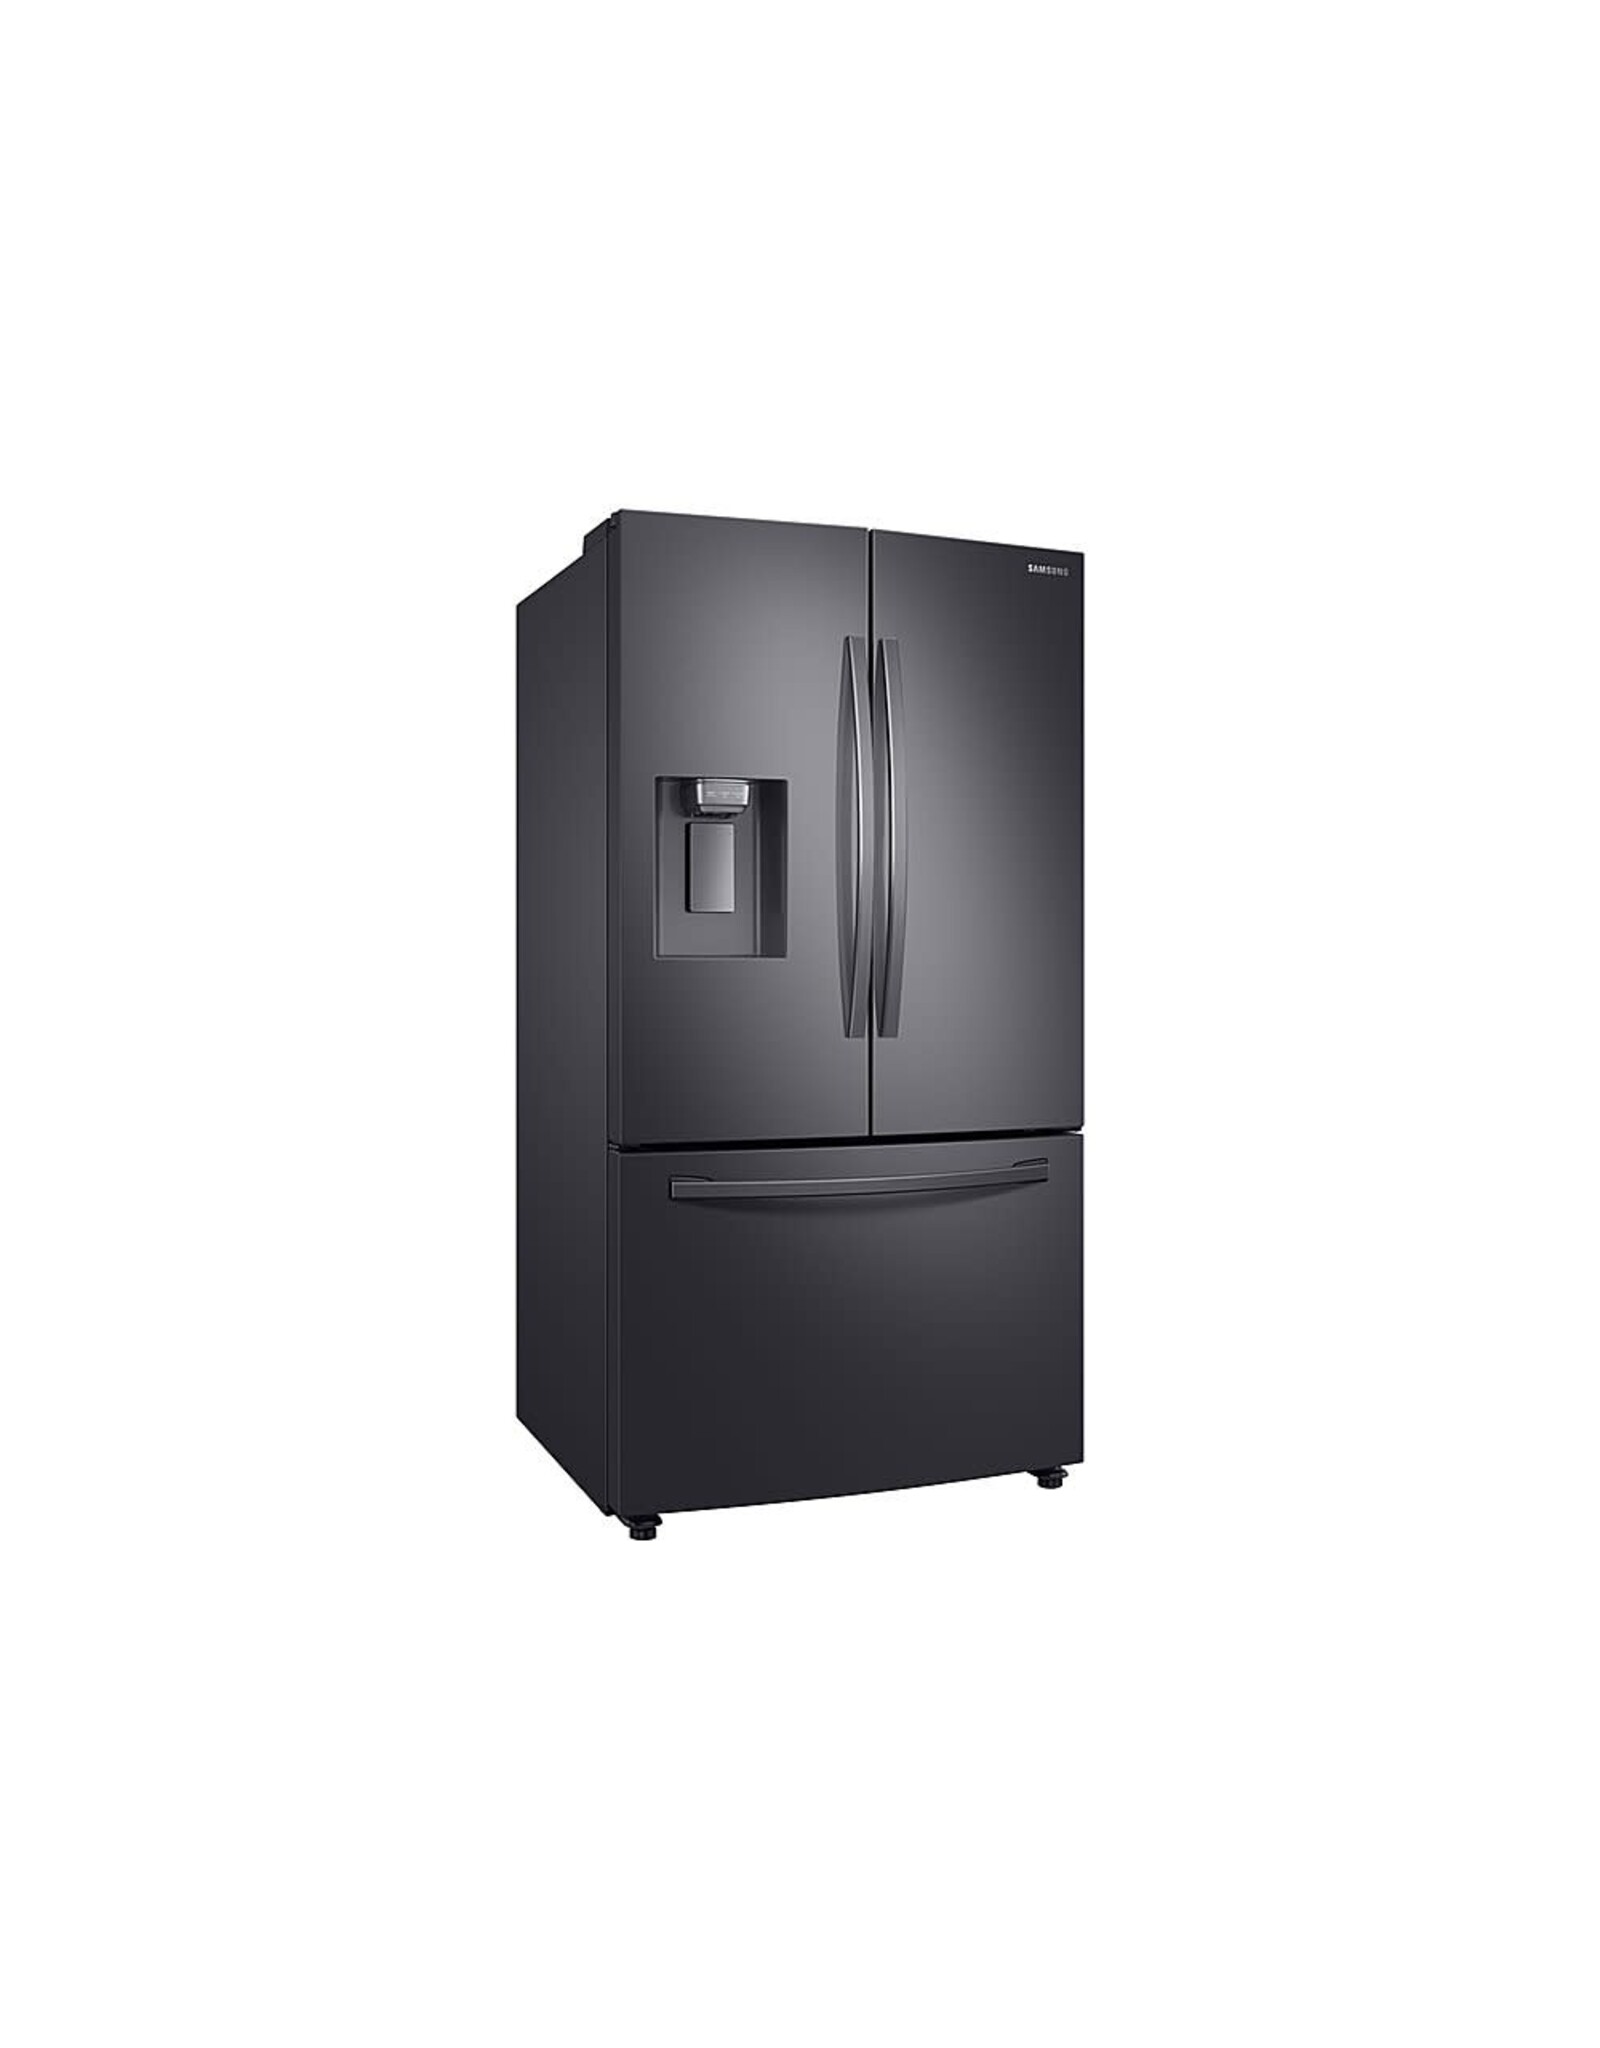 SAMSUNG RF23R6201SG 23 cu. ft. 3-Door French Door Refrigerator in Black Stainless Steel with CoolSelect Pantry, Counter Depth